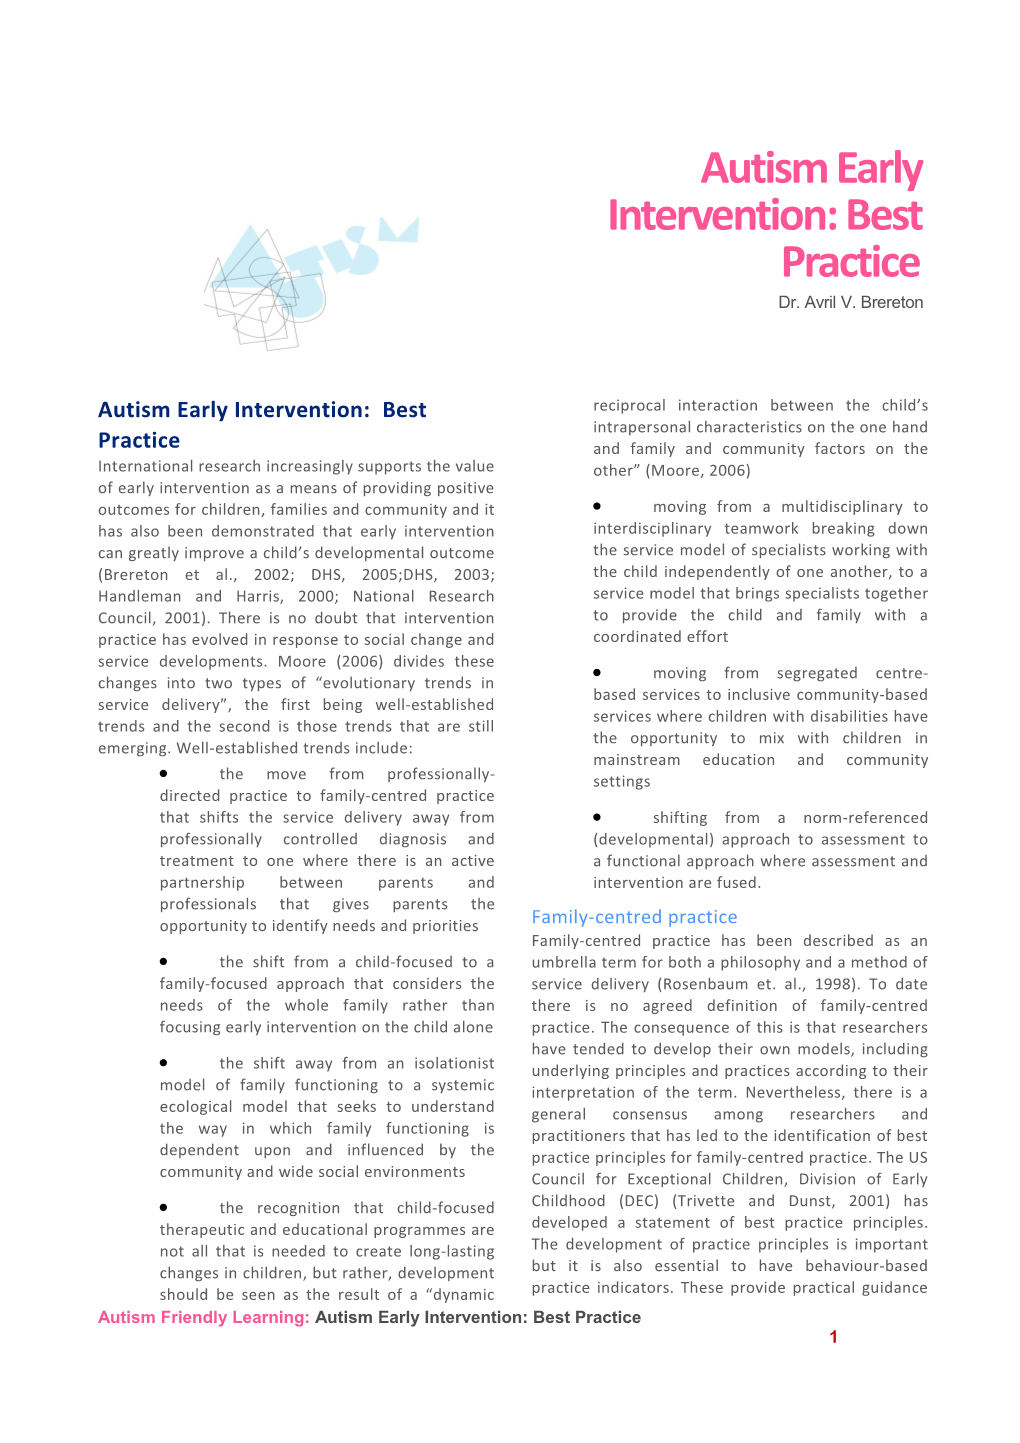 Autism Friendly Learning: Autism Early Intervention: Best Practice 4